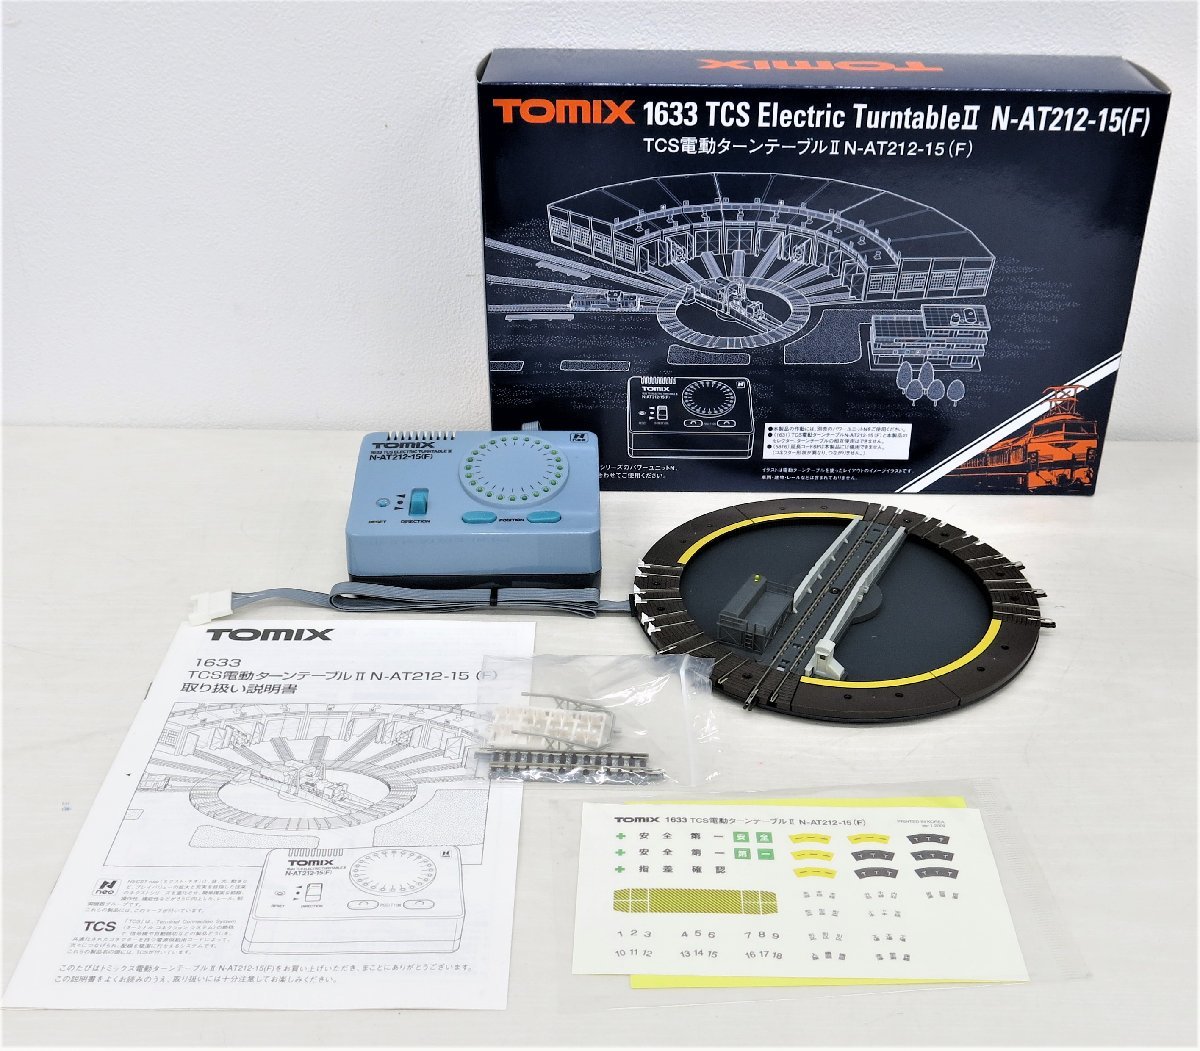 F Tomix 1633 TCS Electric Turntable II N-AT212-15 N scale 